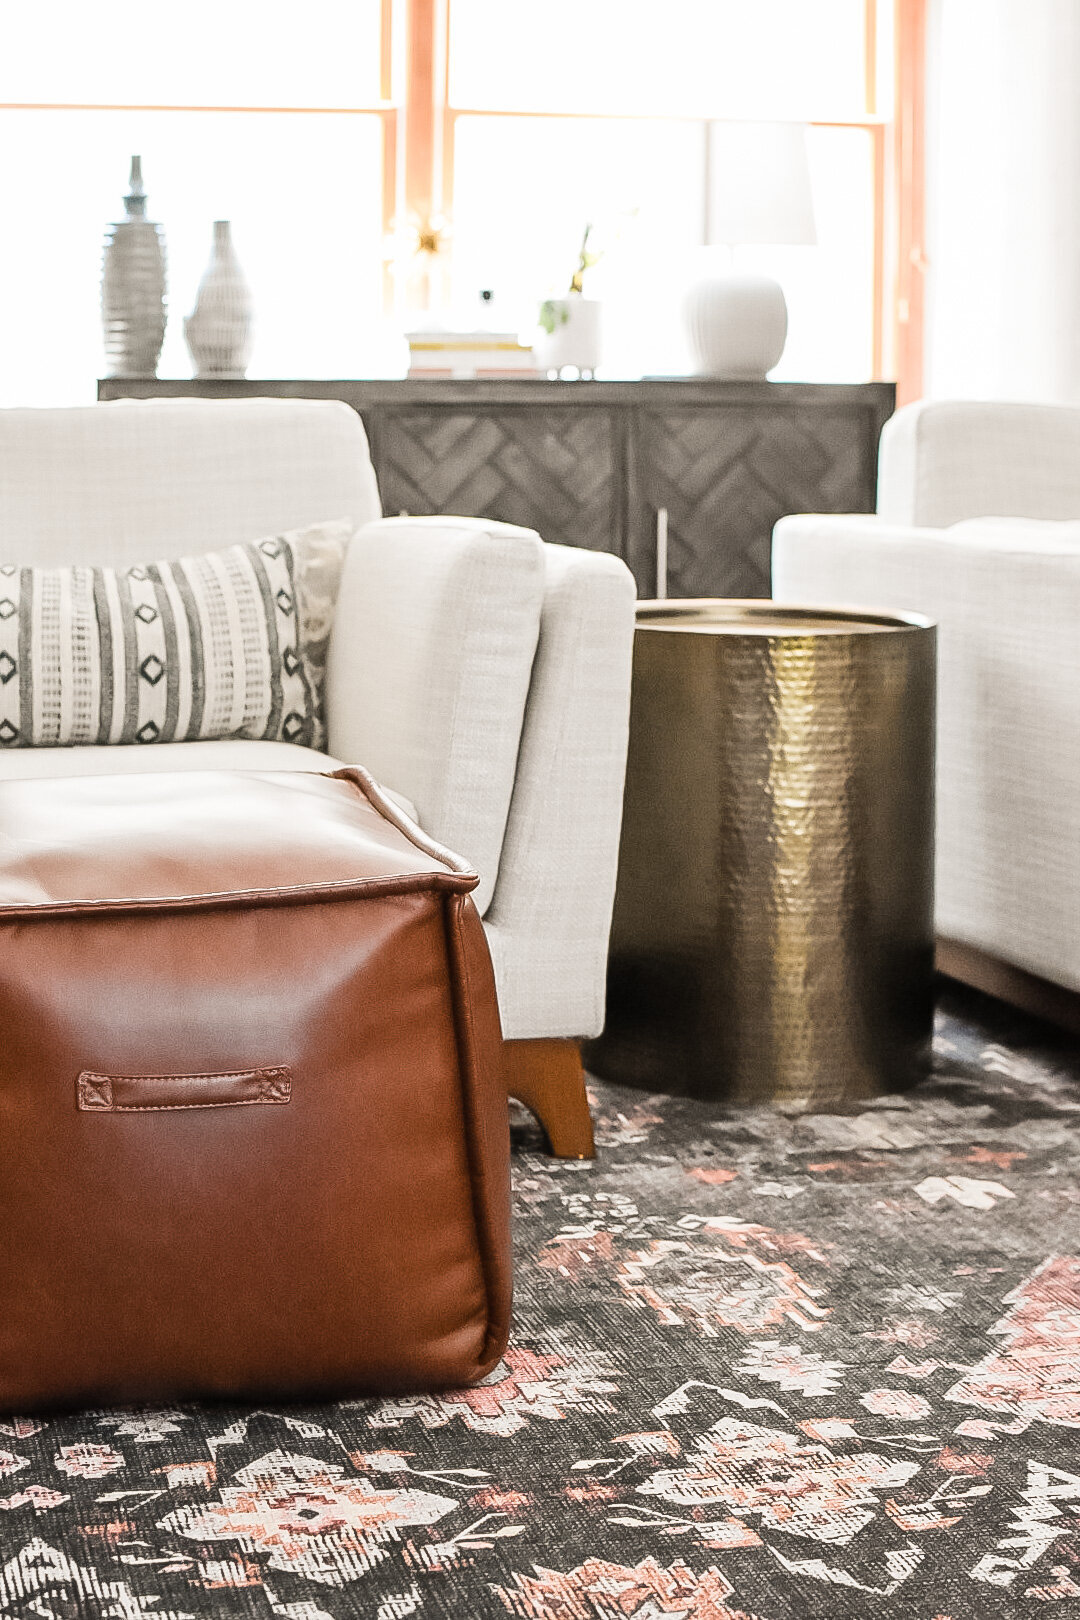 A brown leather ottoman sits on a blue patterned rug